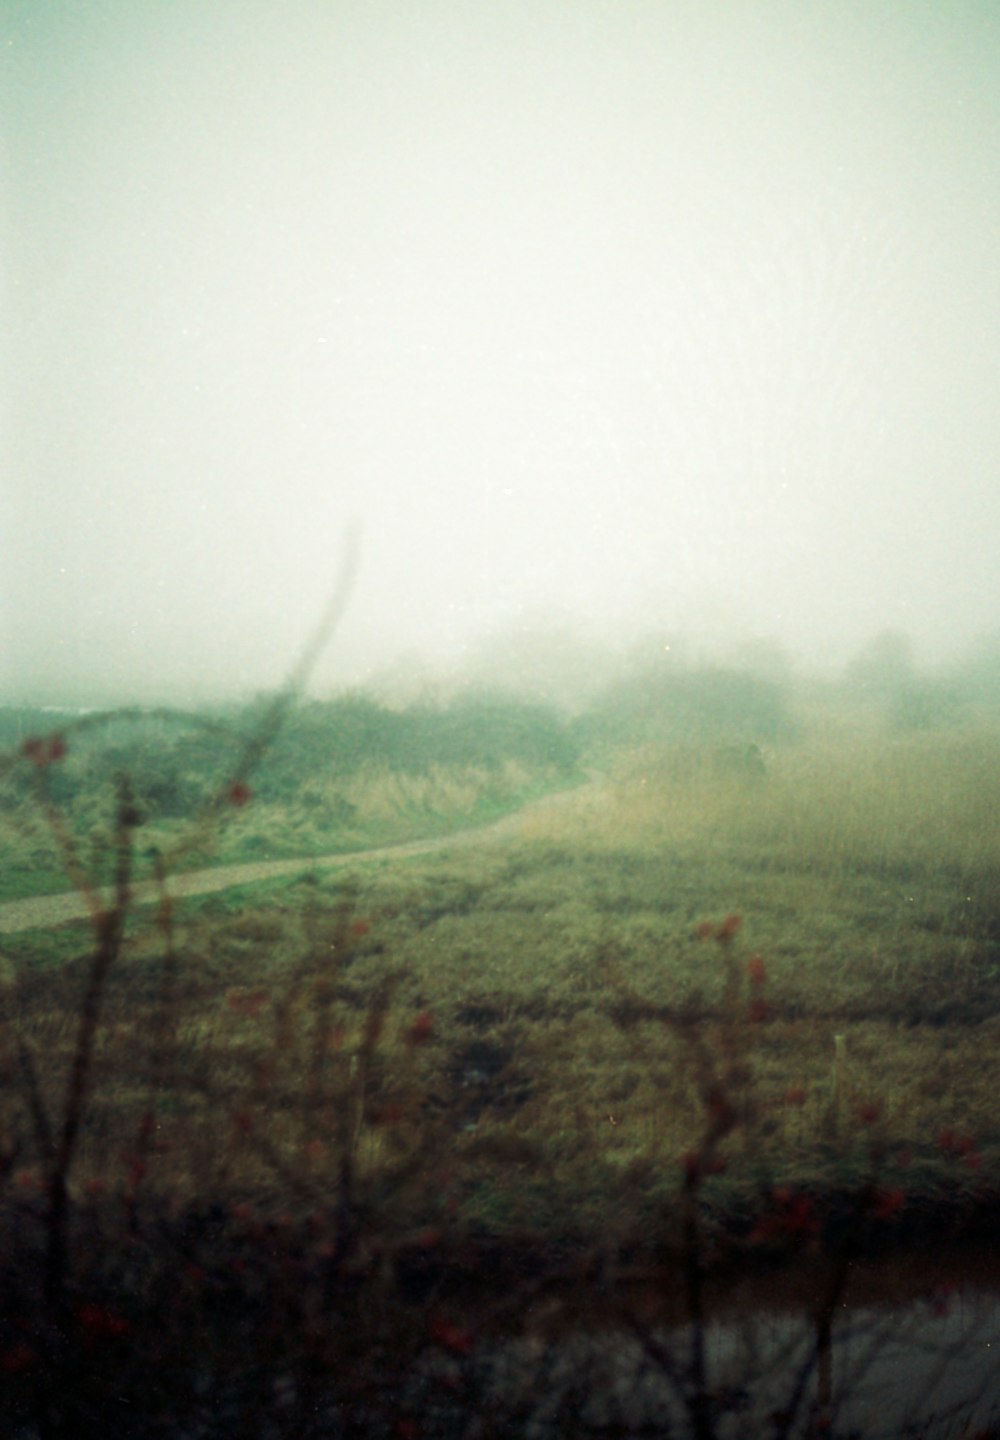 a foggy field with a stop sign in the foreground